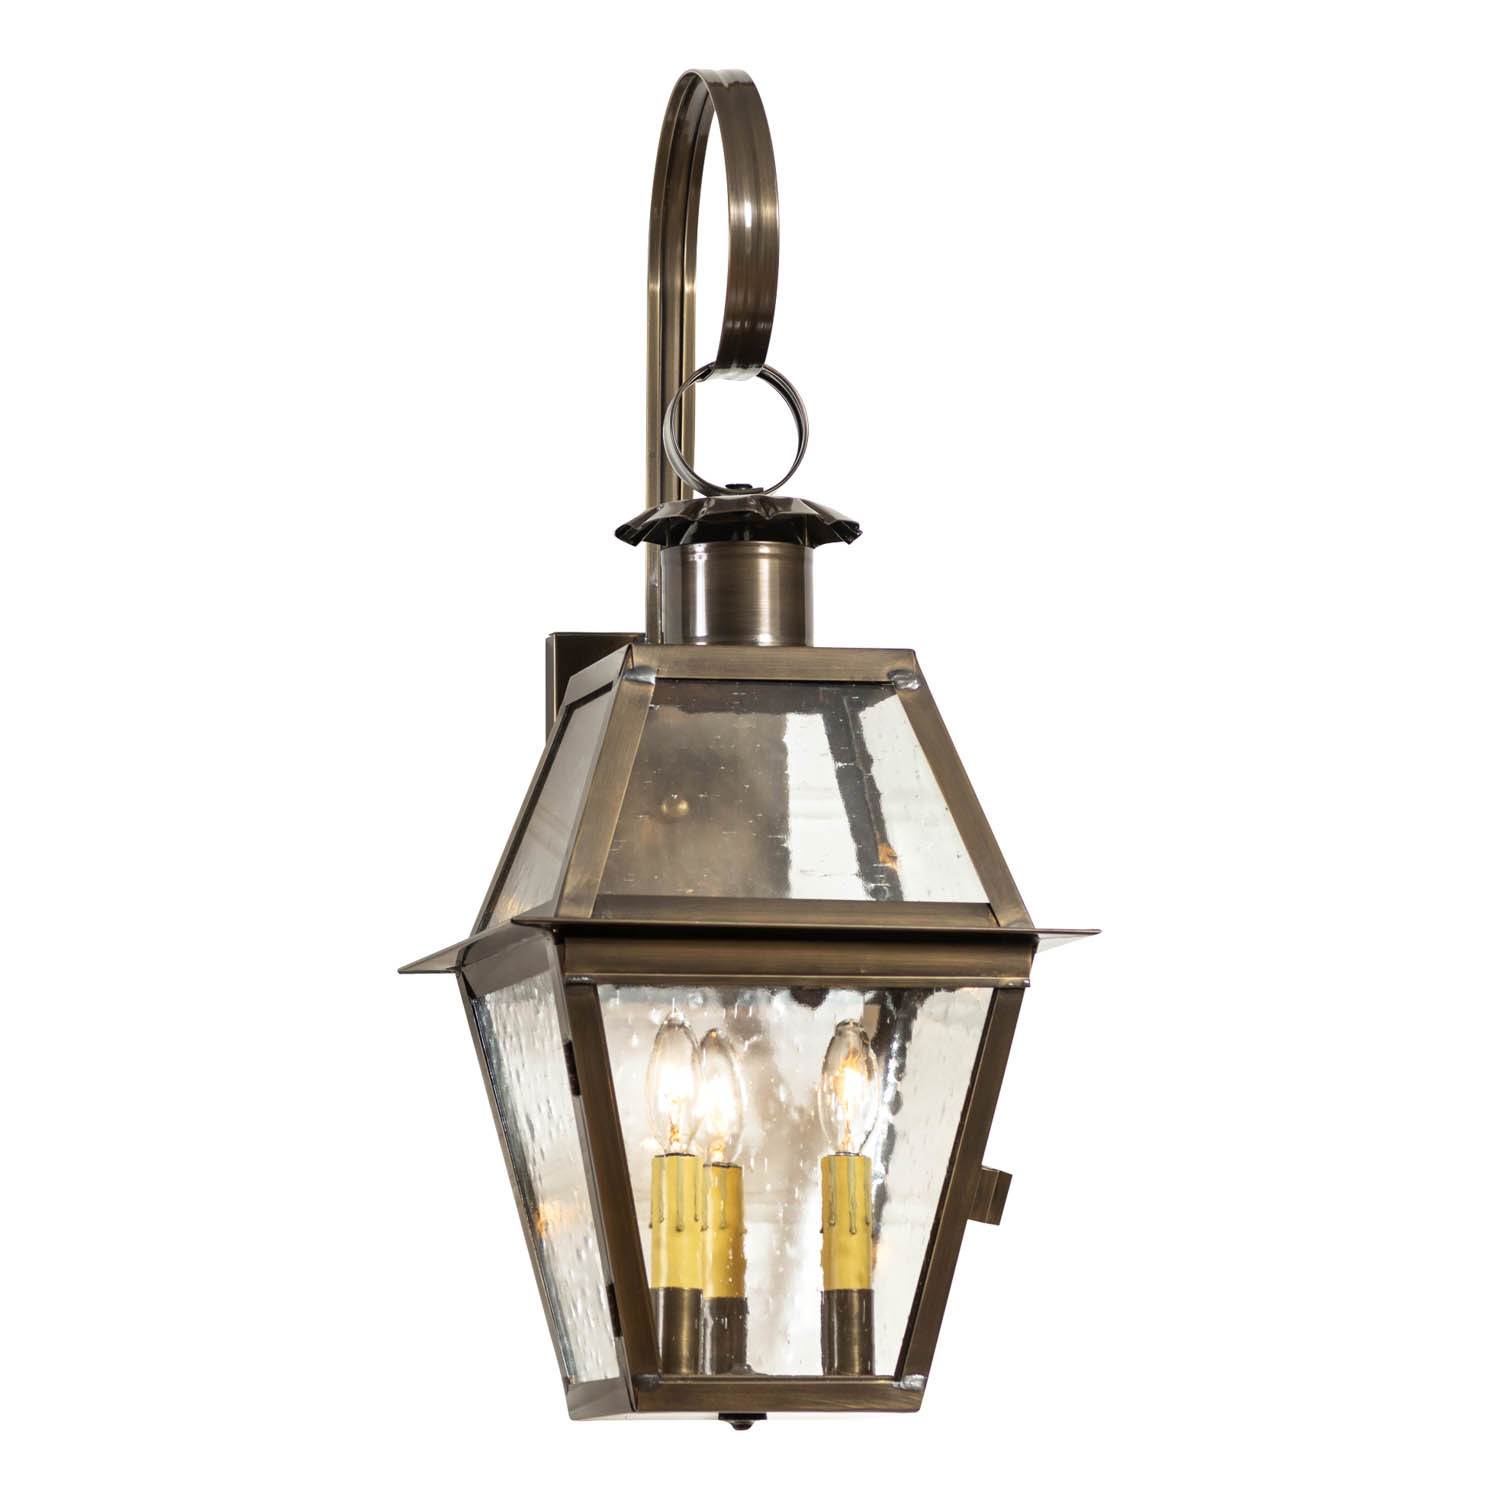 Irvins Country Tinware Town Crier Outdoor Wall Light in Solid Weathered Brass - $494.95